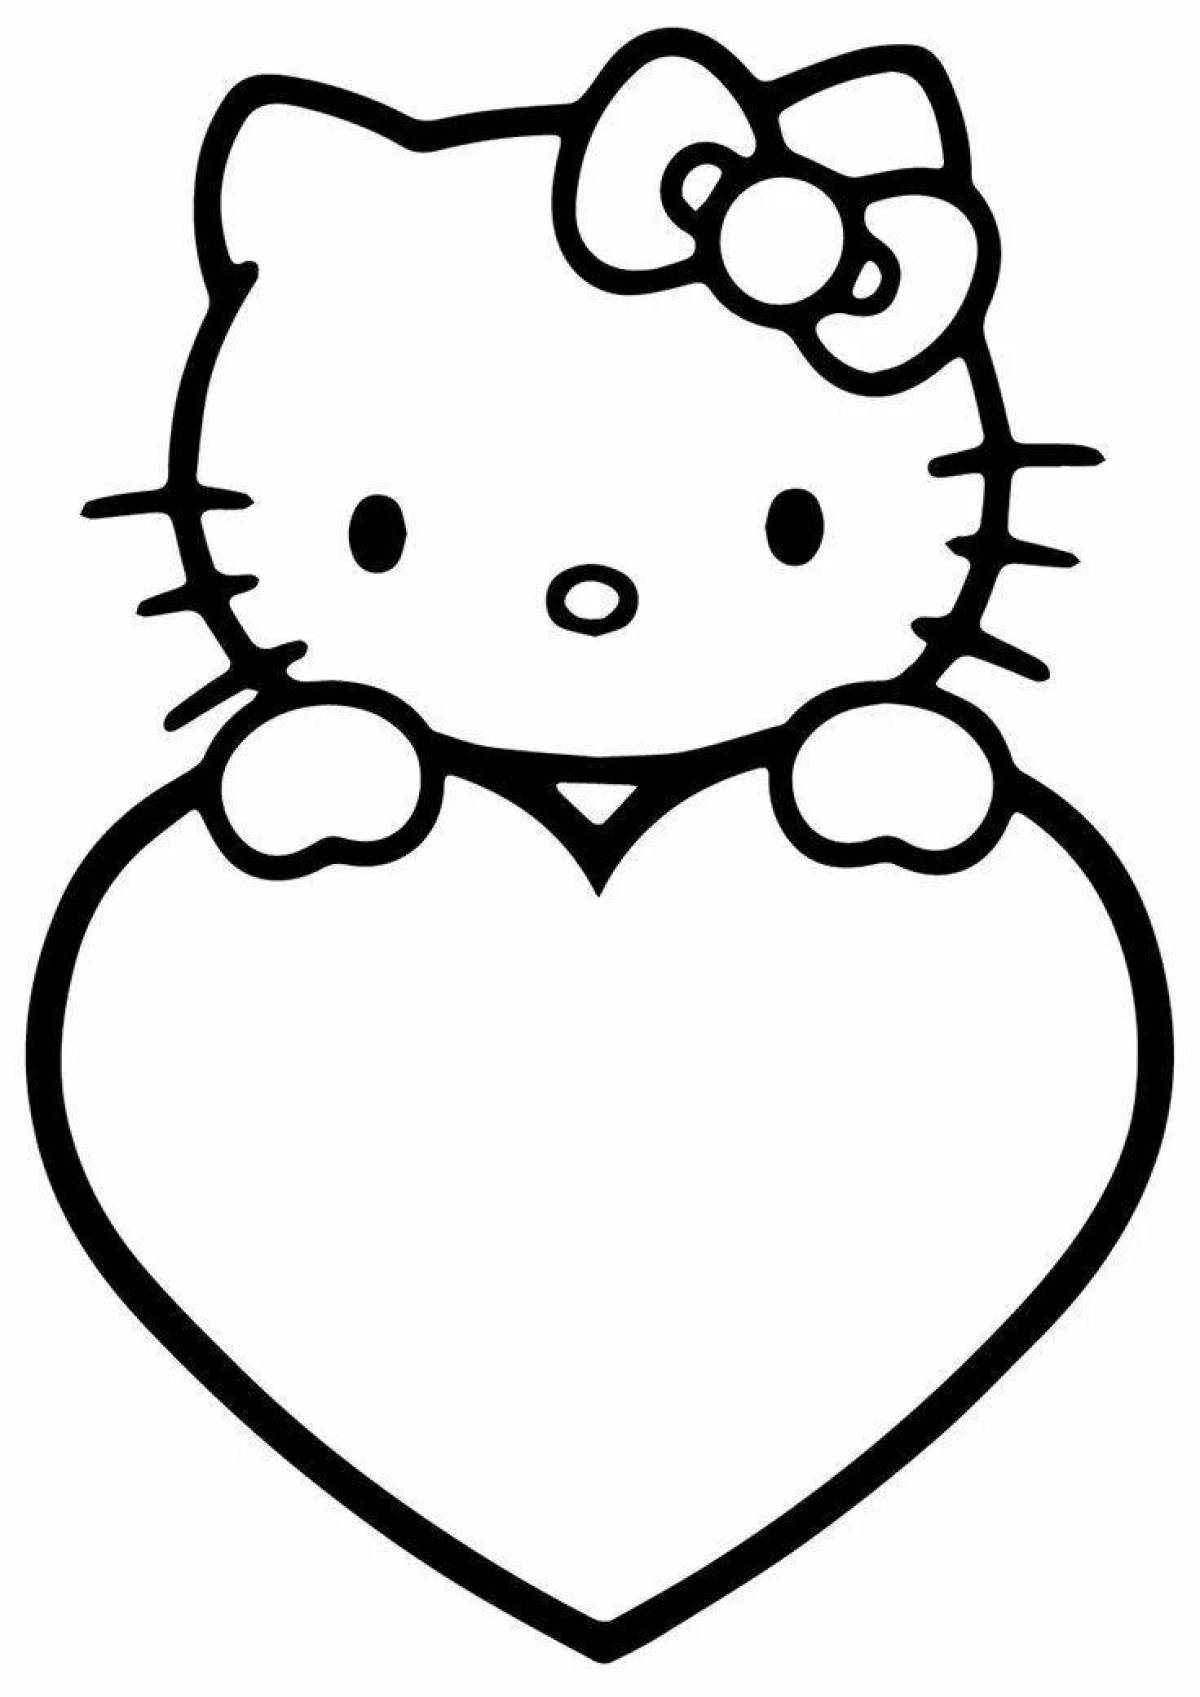 Coloring page loving cat with a heart